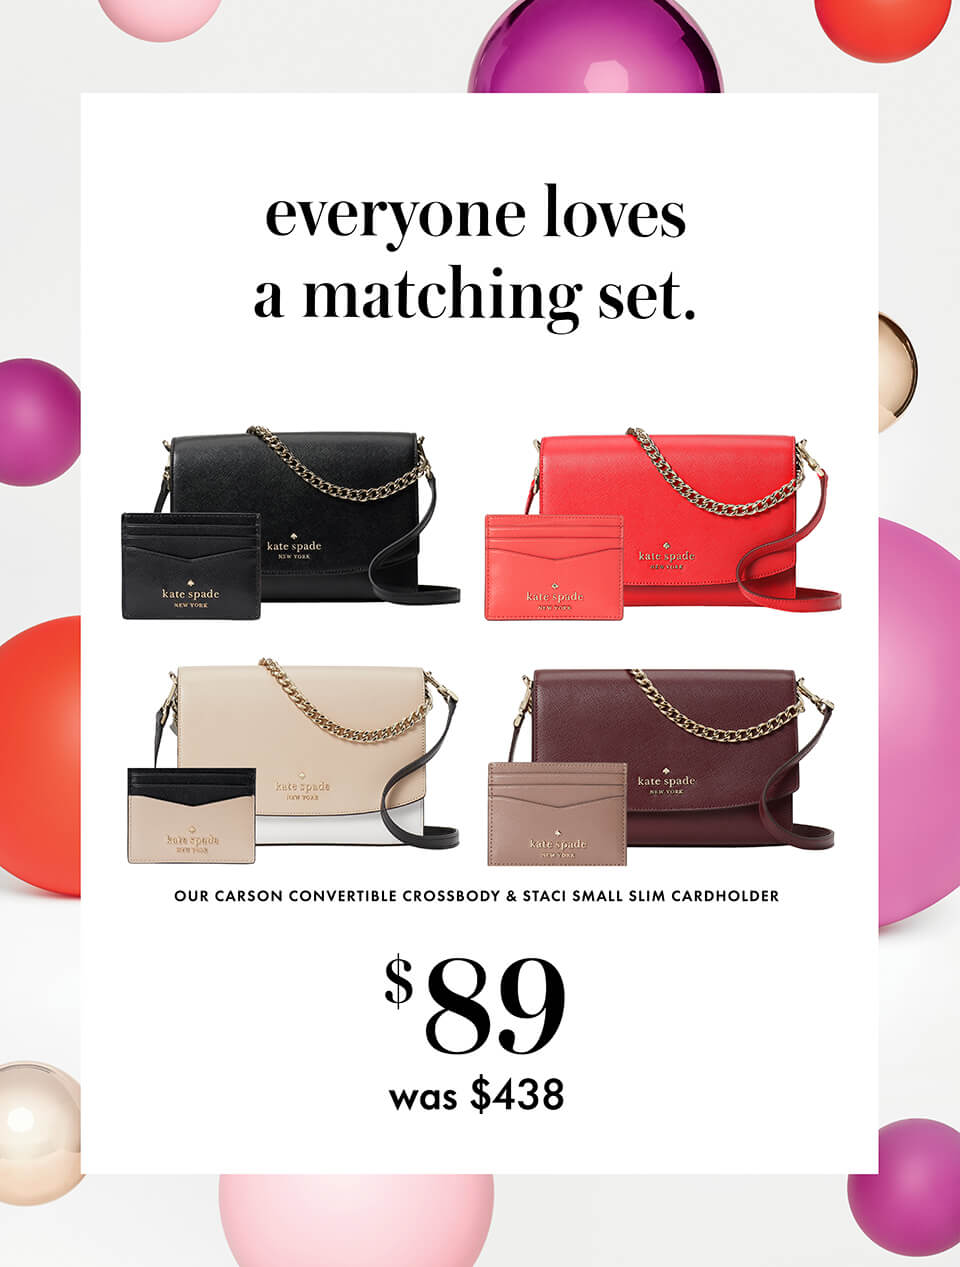 kate spade outlet canada